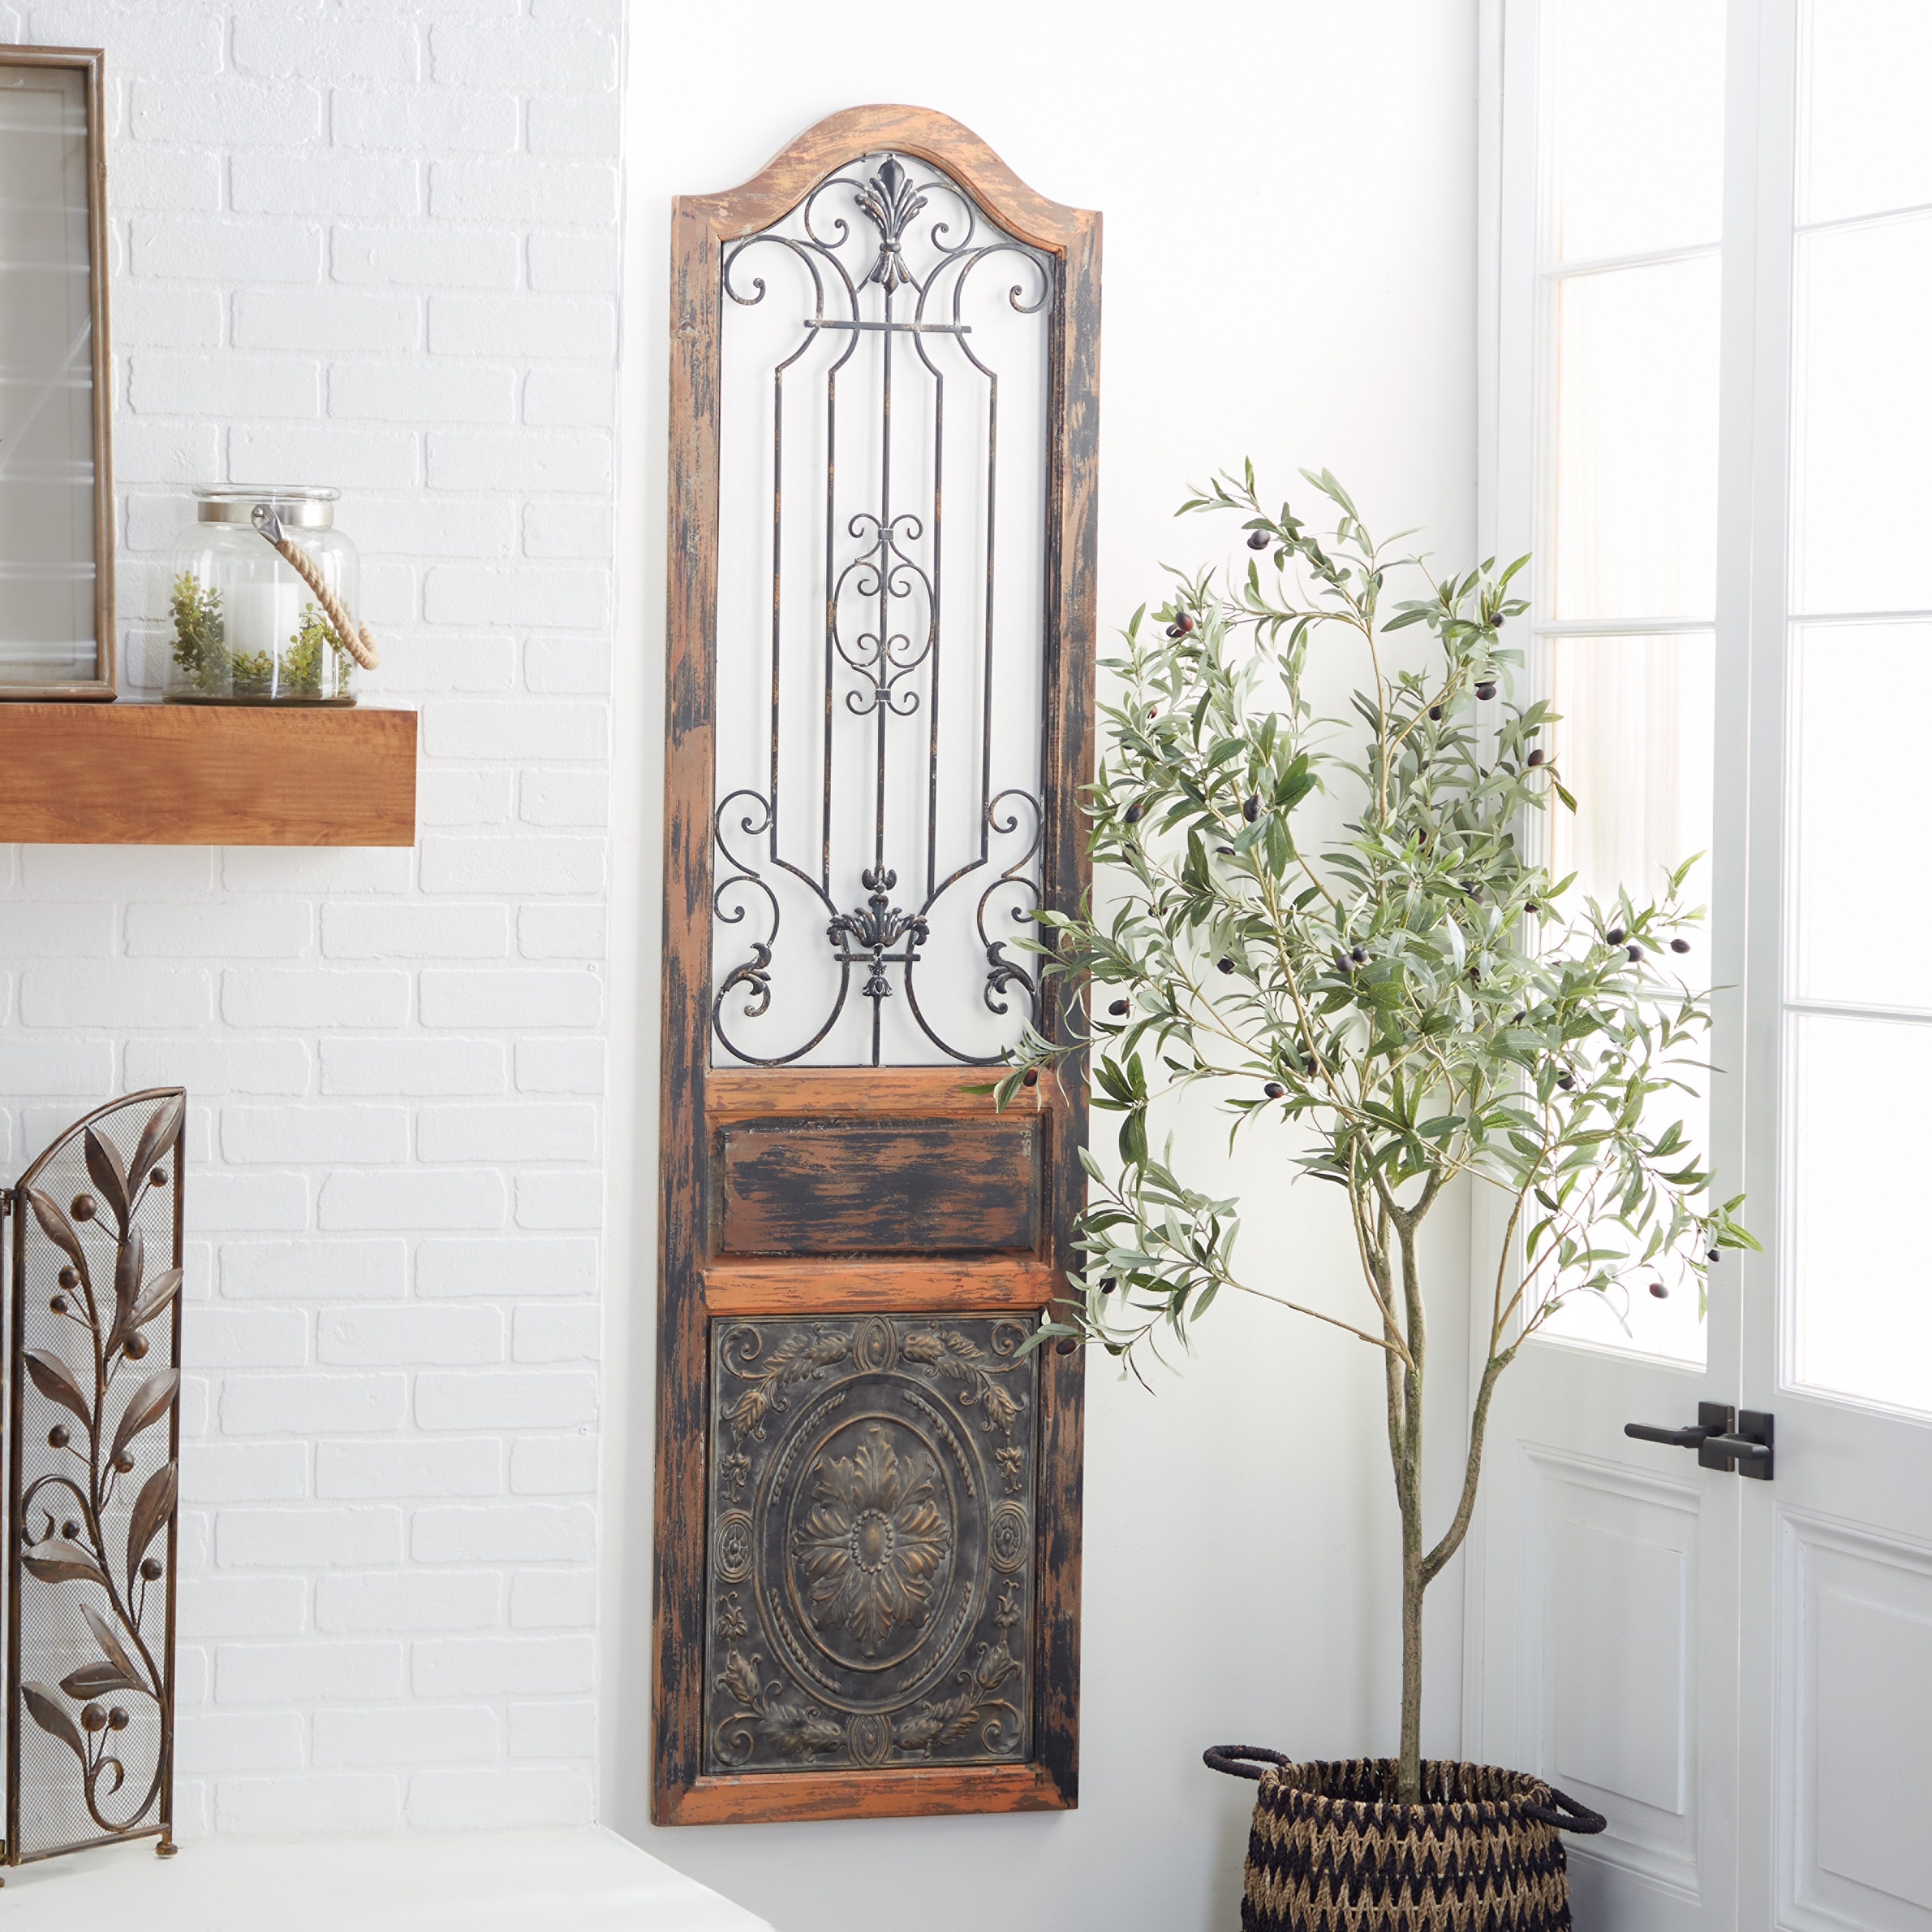 Brown Wood Distressed Door Inspired Ornamental Scroll Wall Decor with Metal  Wire Details Bed Bath  Beyond 8674433